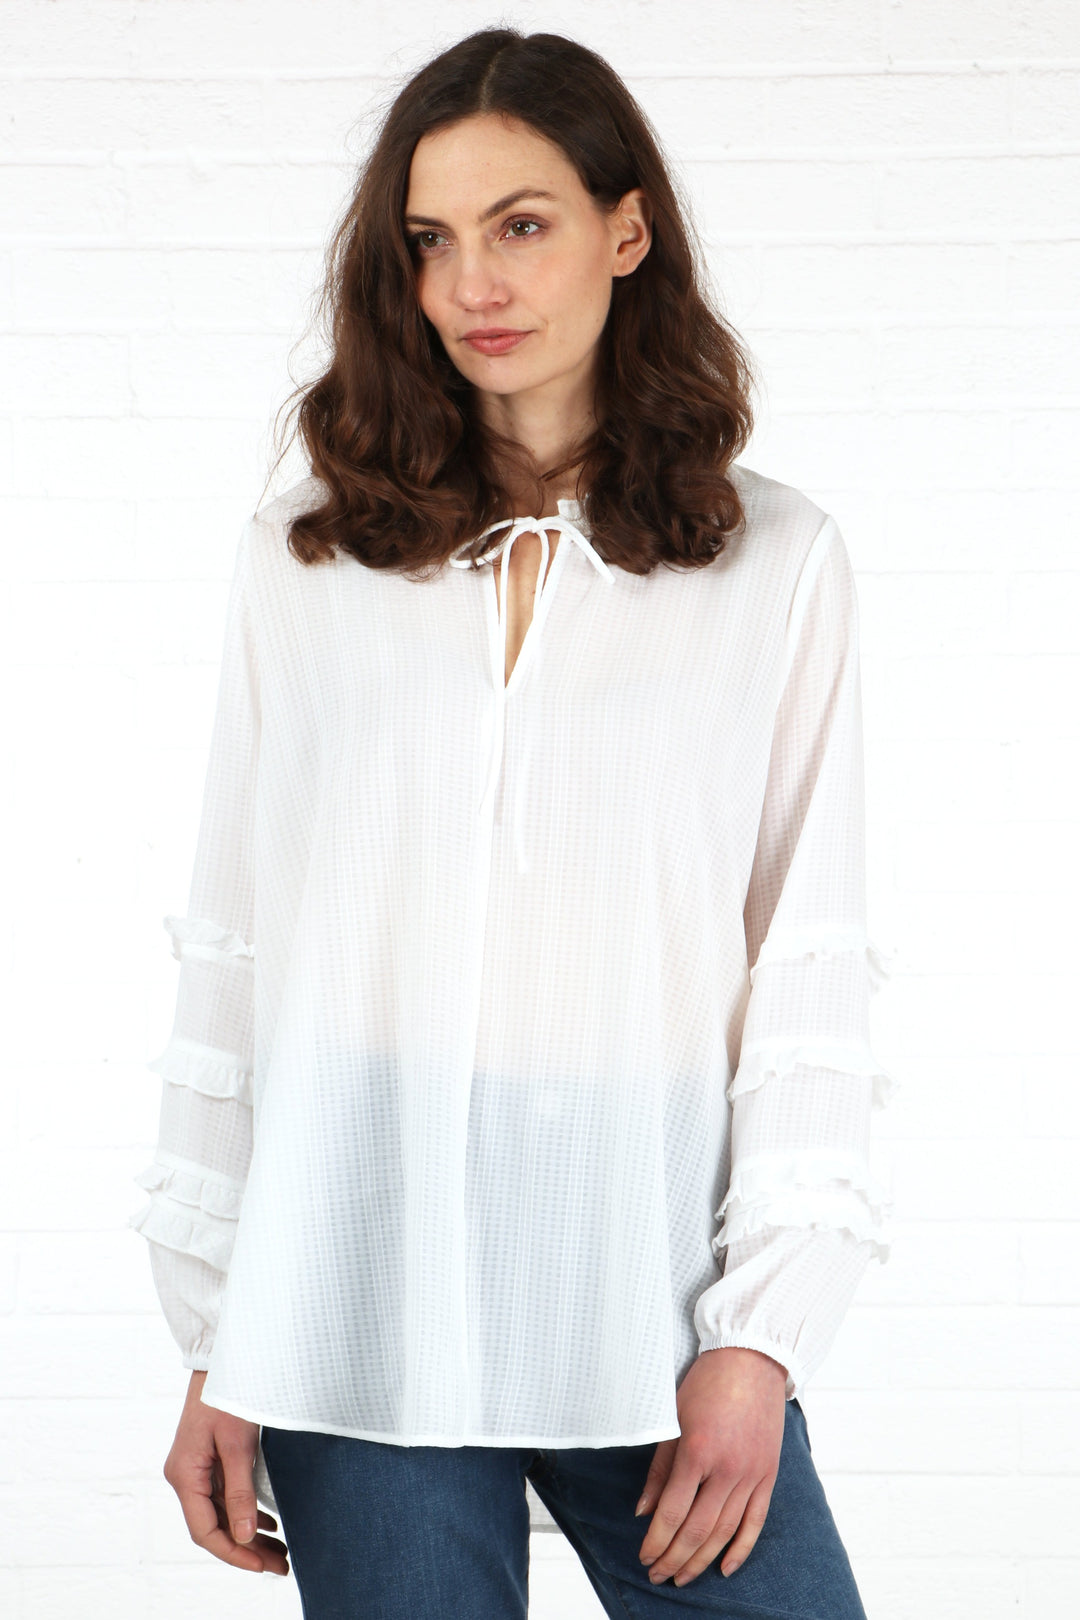 model wearing a lightweight white long sleeve blouse with frill sleeves and a grandad collar